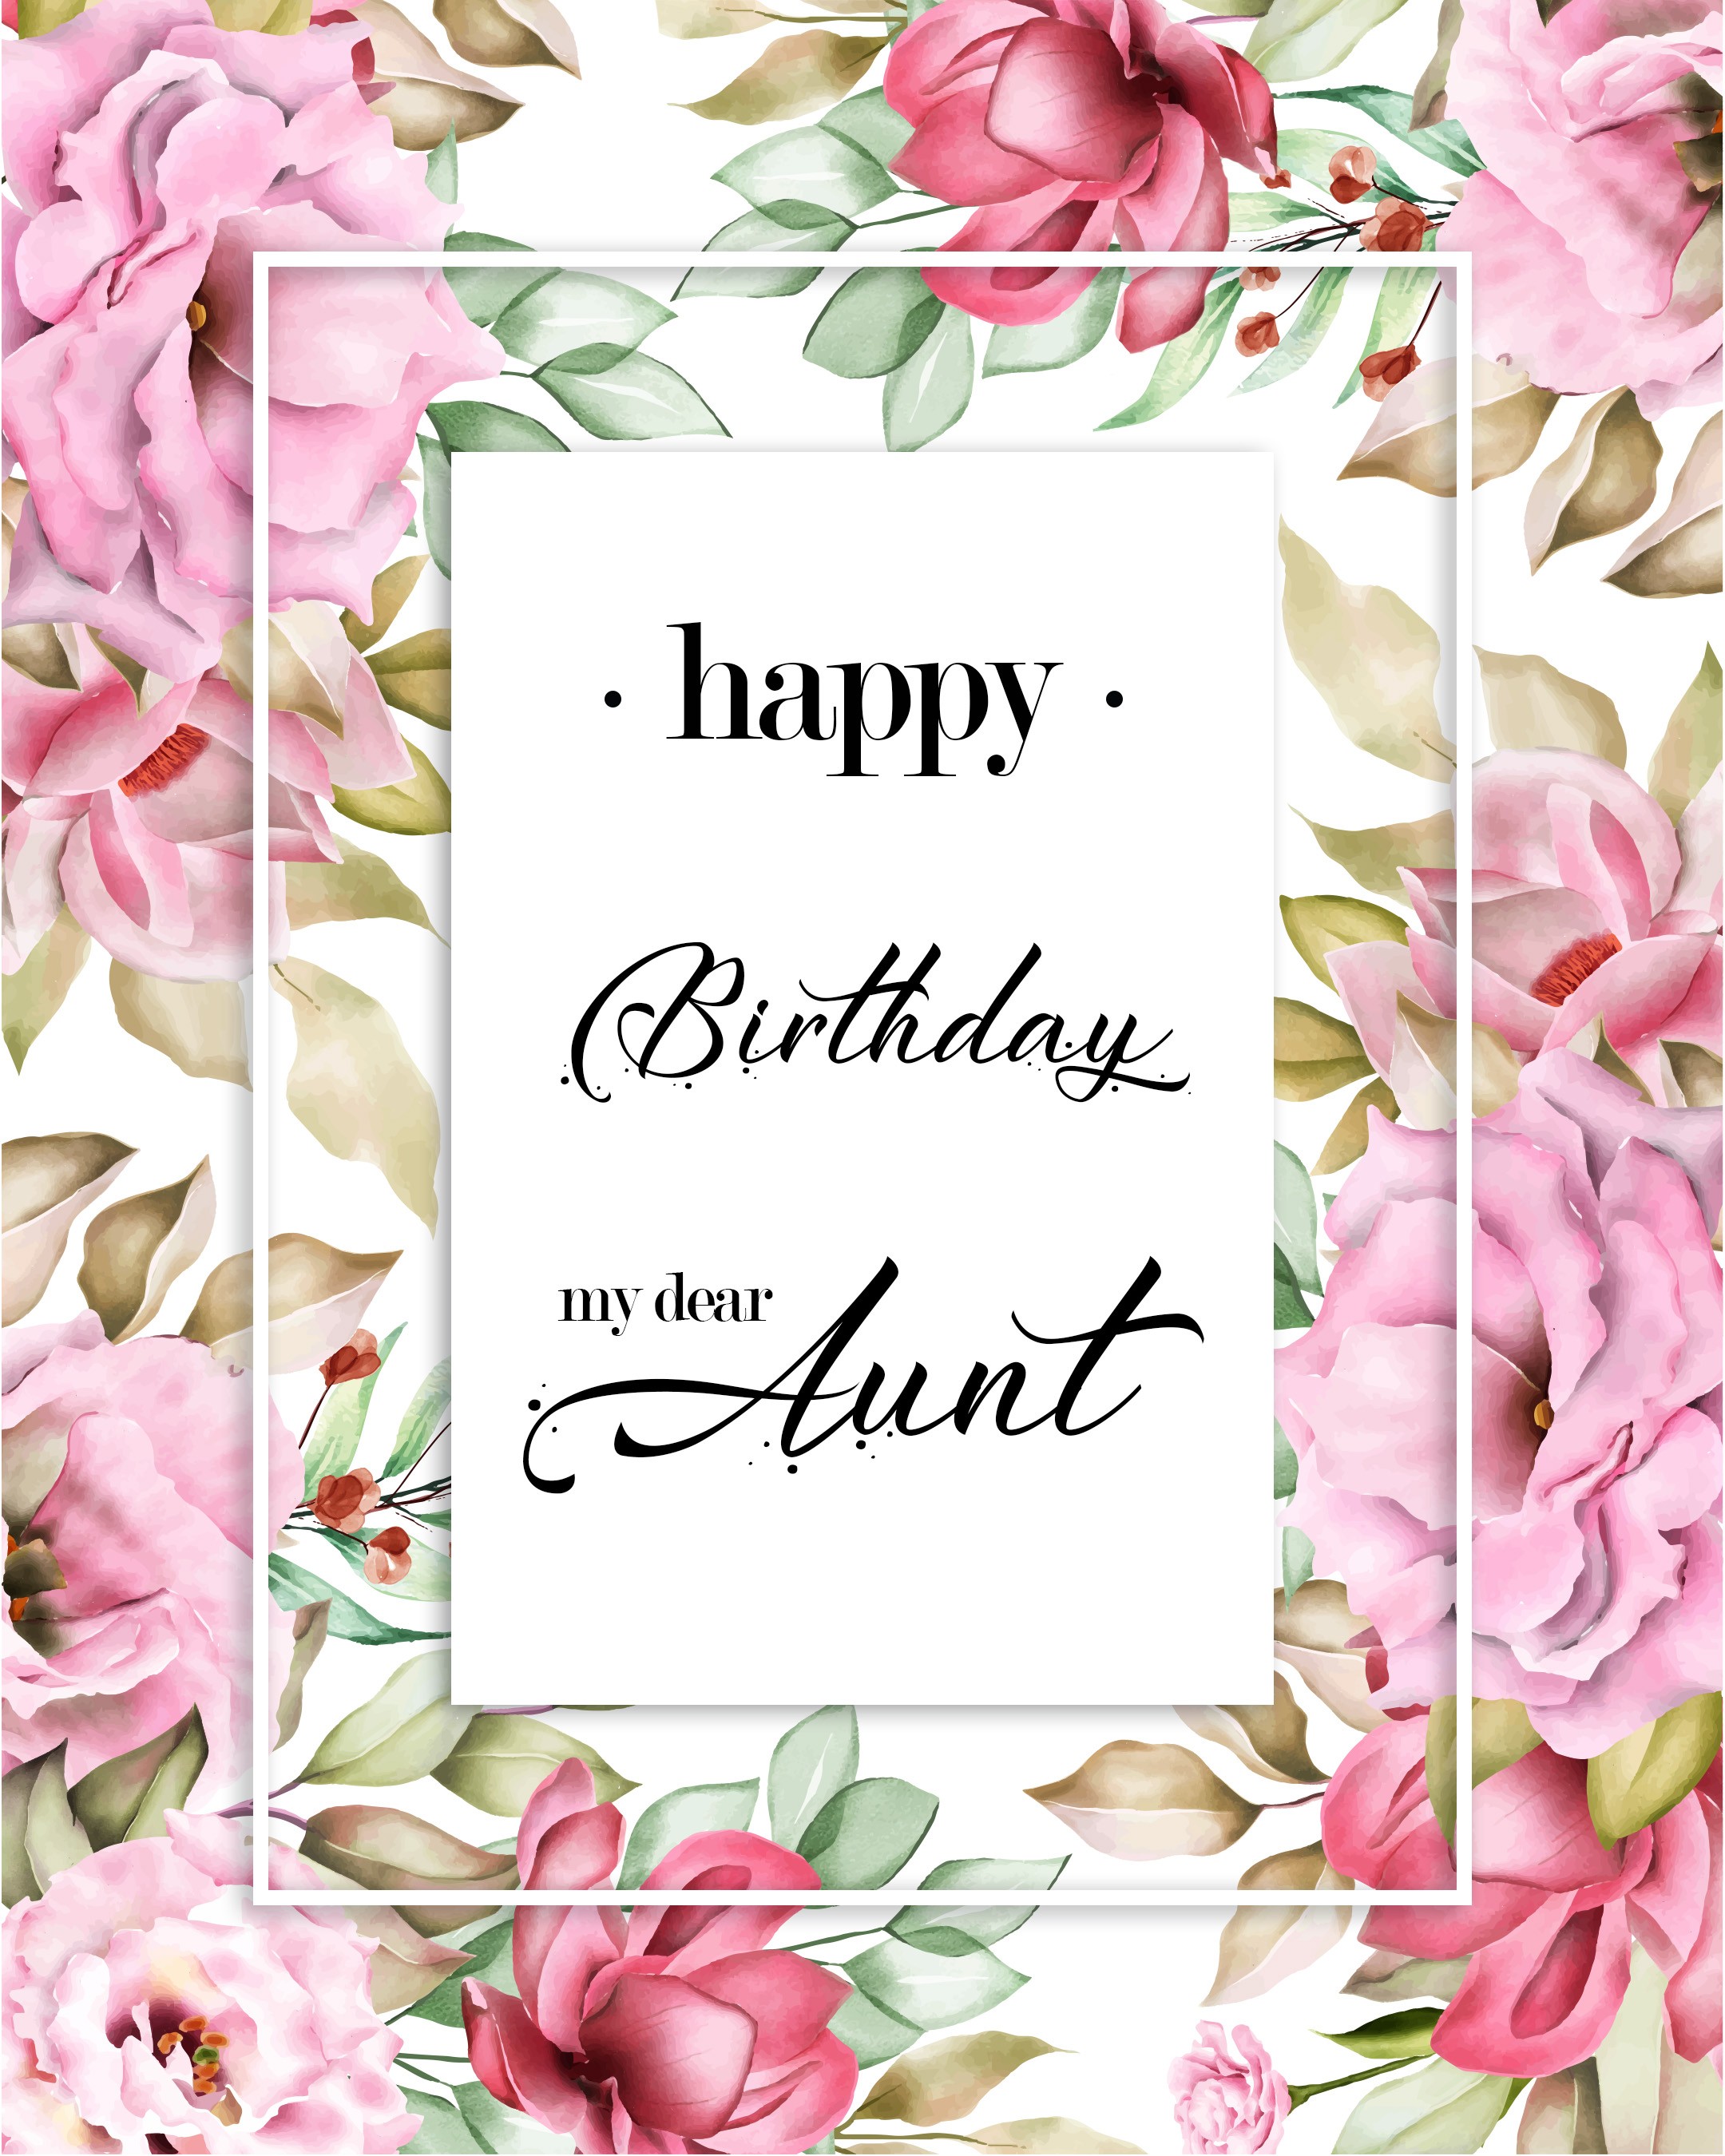 Free Happy Birthday Image For Aunt With Flowers - birthdayimg.com